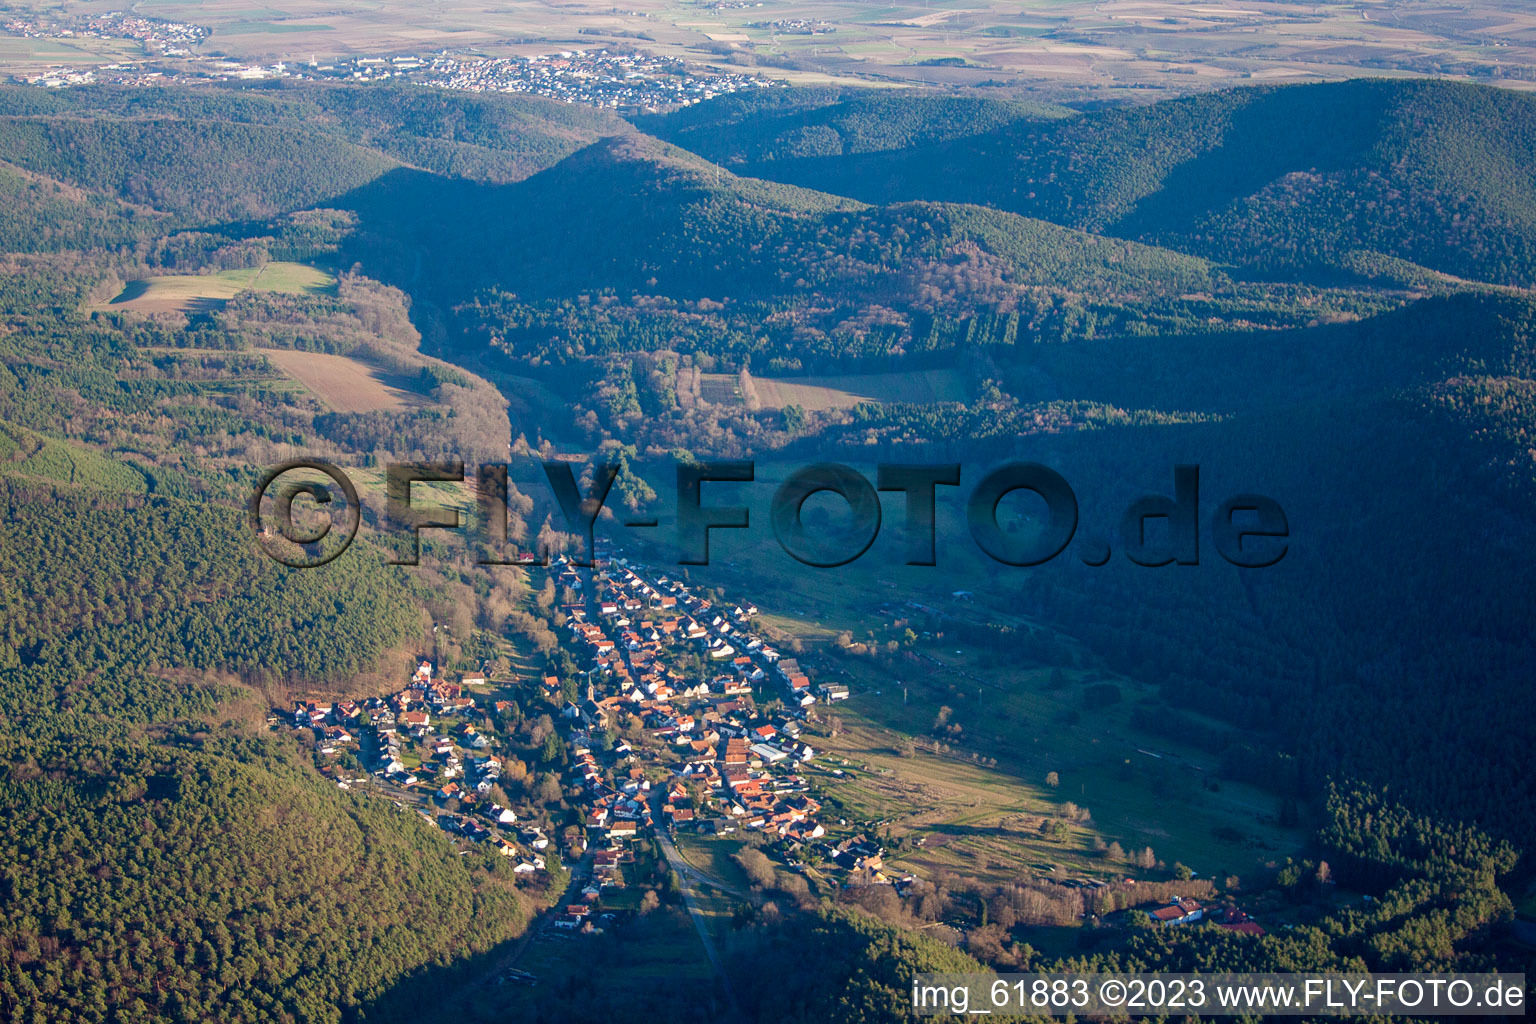 Drone image of Vorderweidenthal in the state Rhineland-Palatinate, Germany